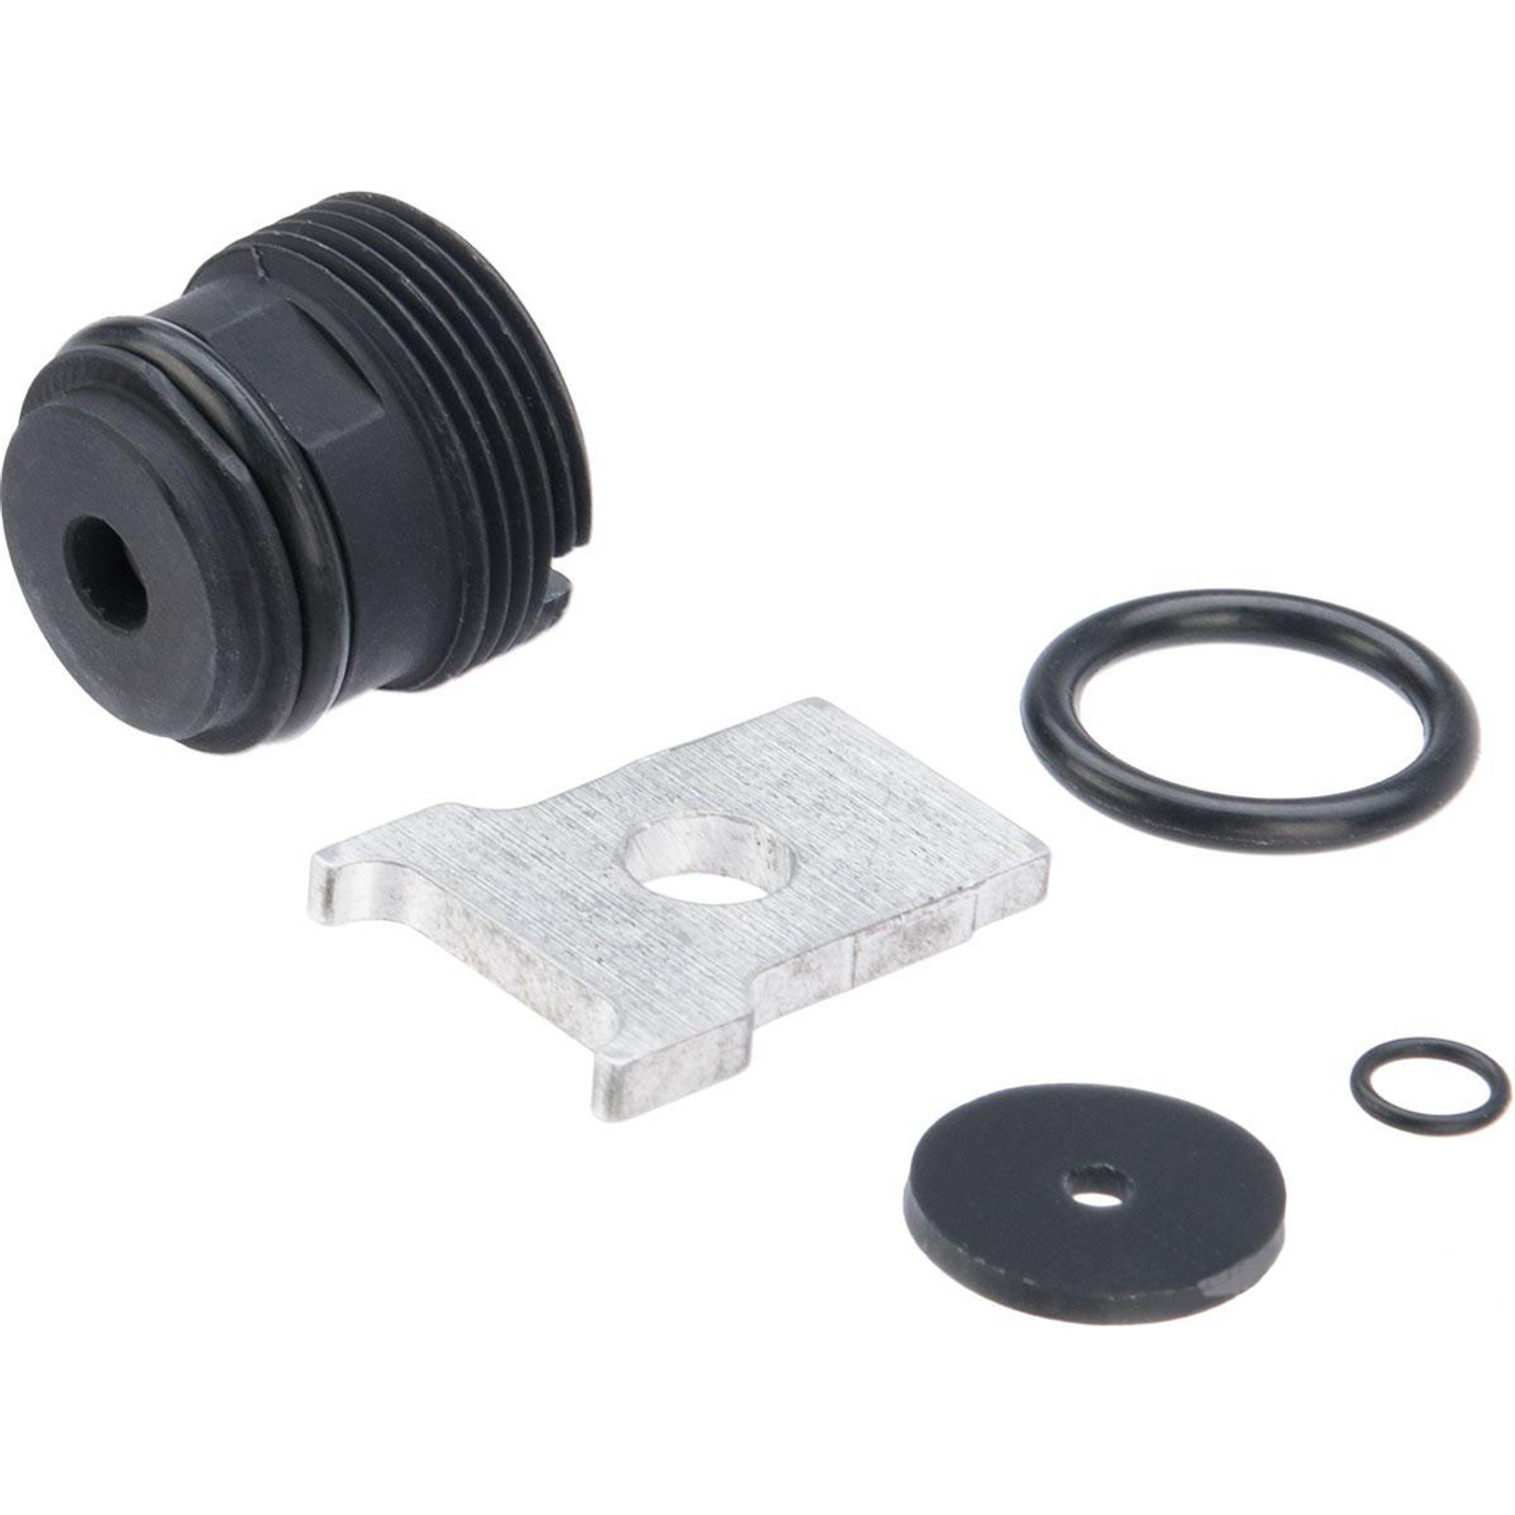 Wolverine Airsoft Wraith 12g to 33g CO2 Conversion Kit for Wraith Stocks